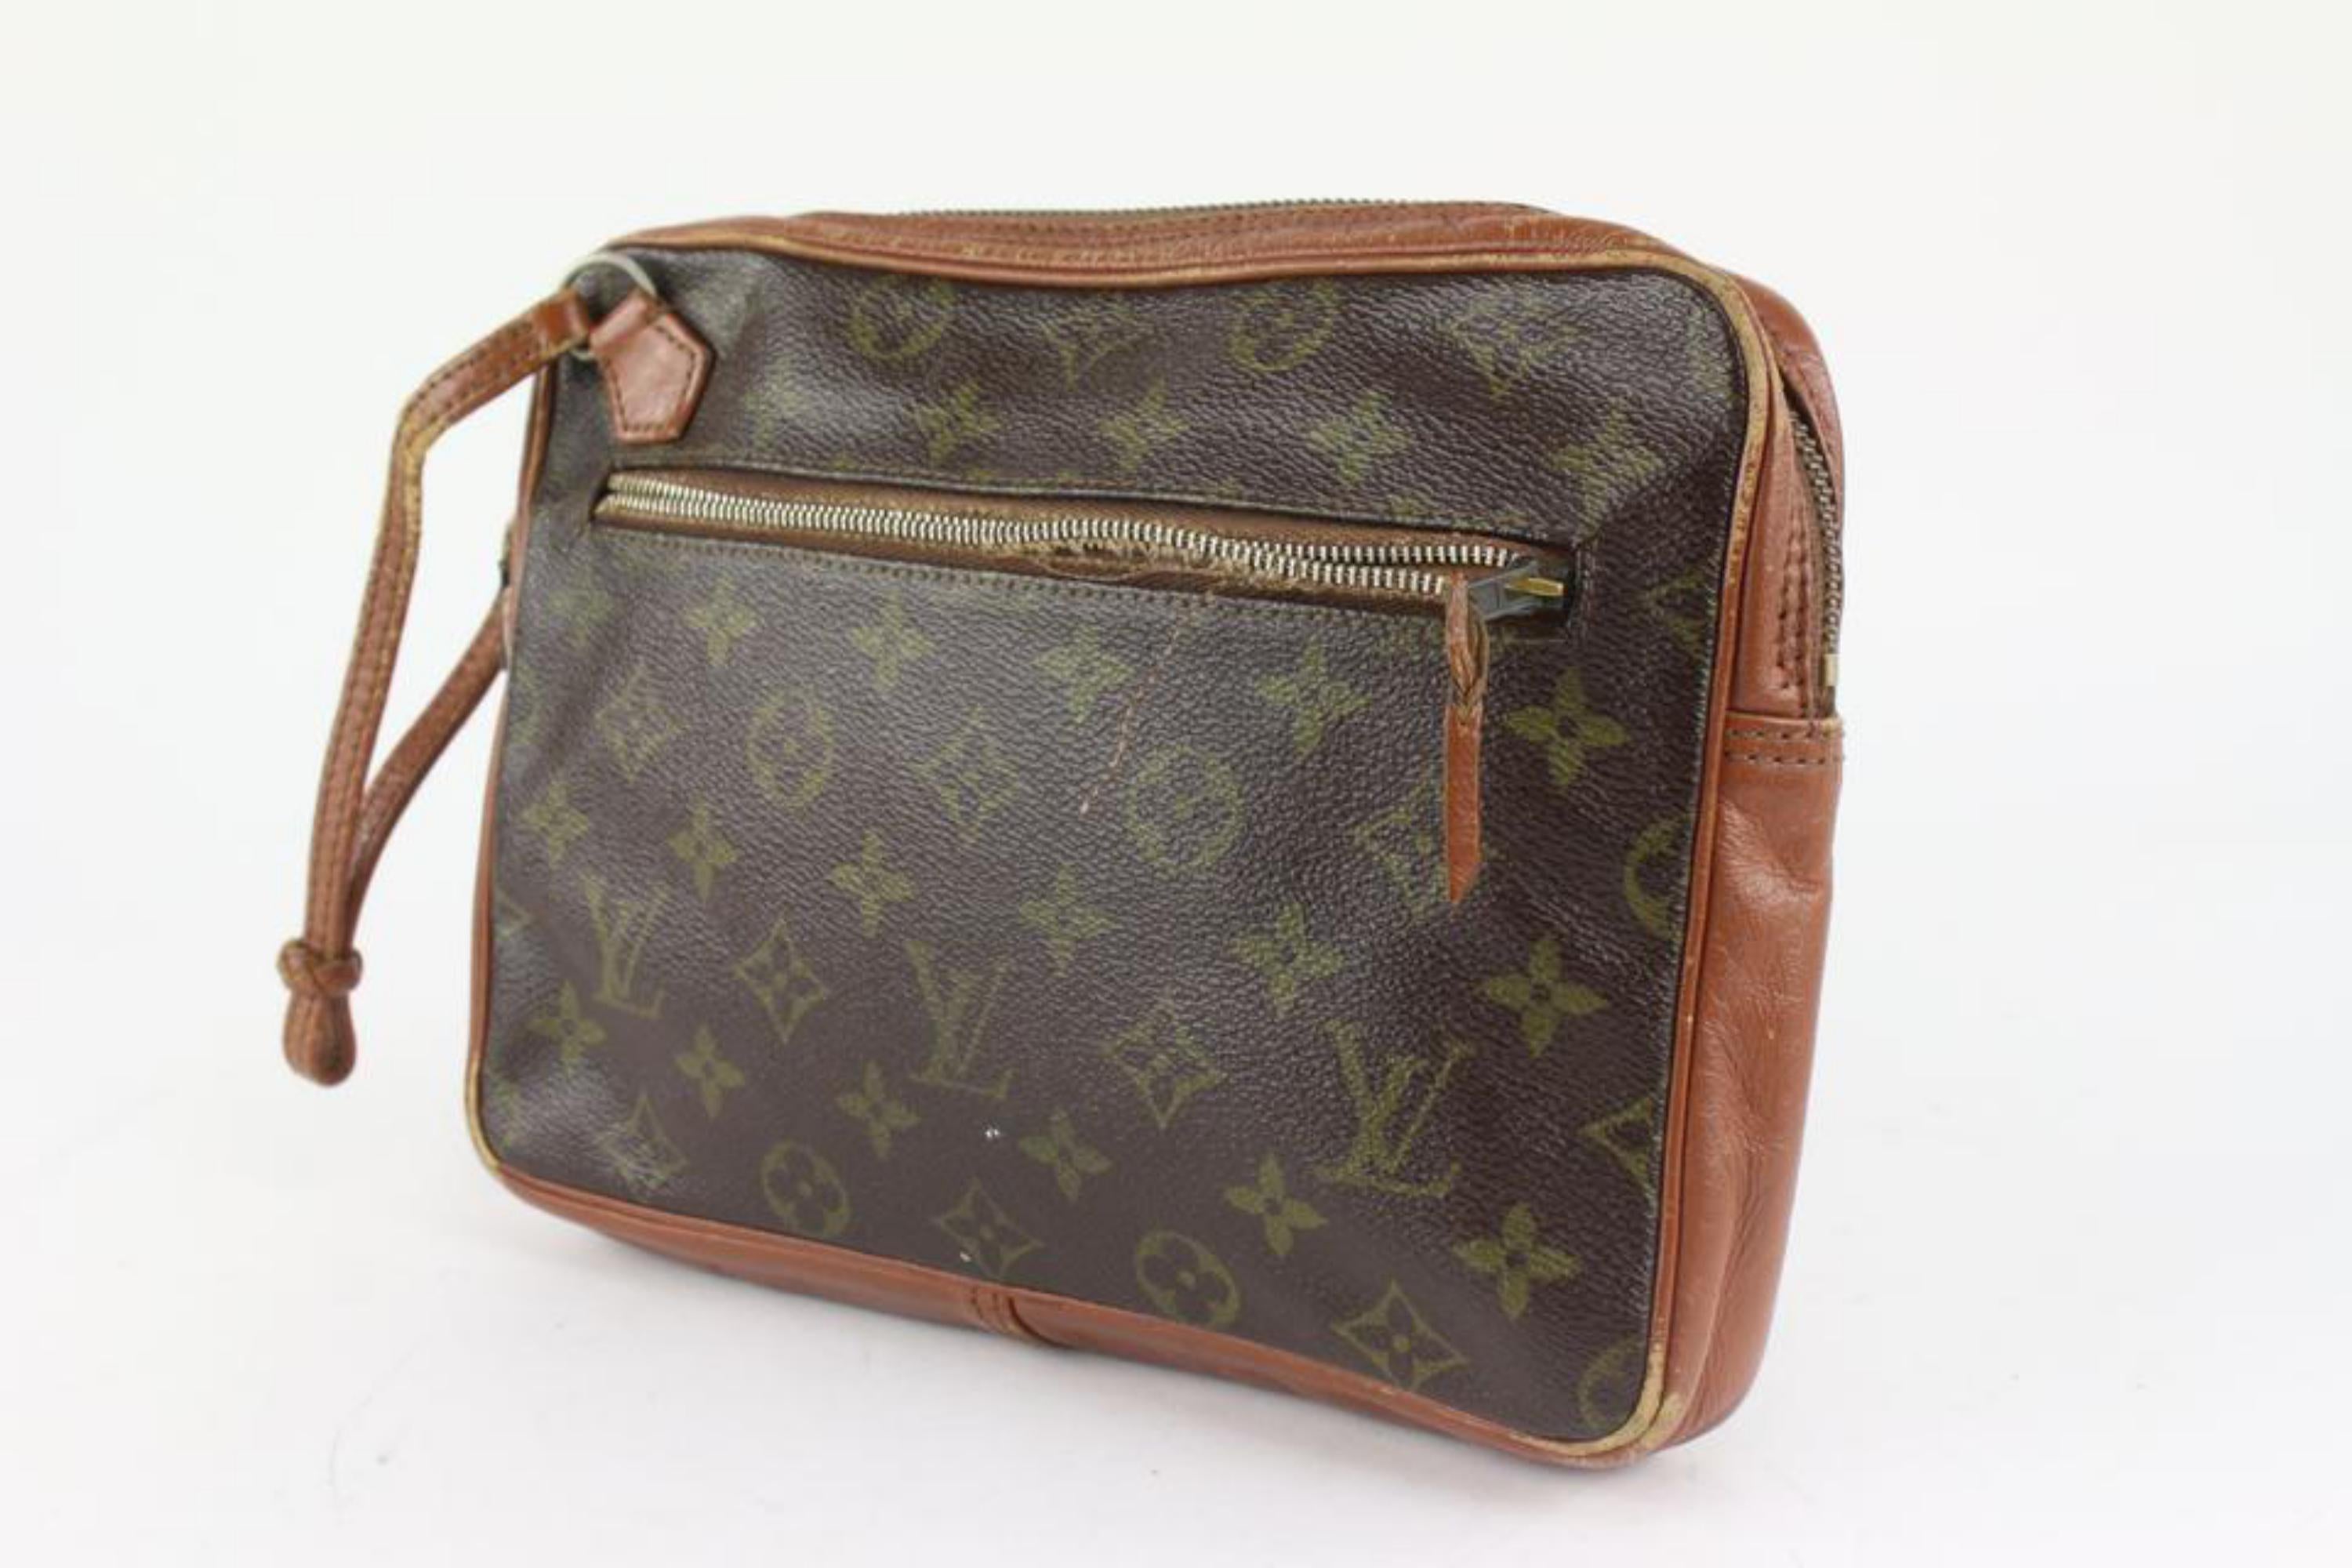 Louis Vuitton Monogram Pochtte Marly Dragonne Wristlet Pouch 1216lv48
Date Code/Serial Number: 871
Made In: France
Measurements: Length:  9.5